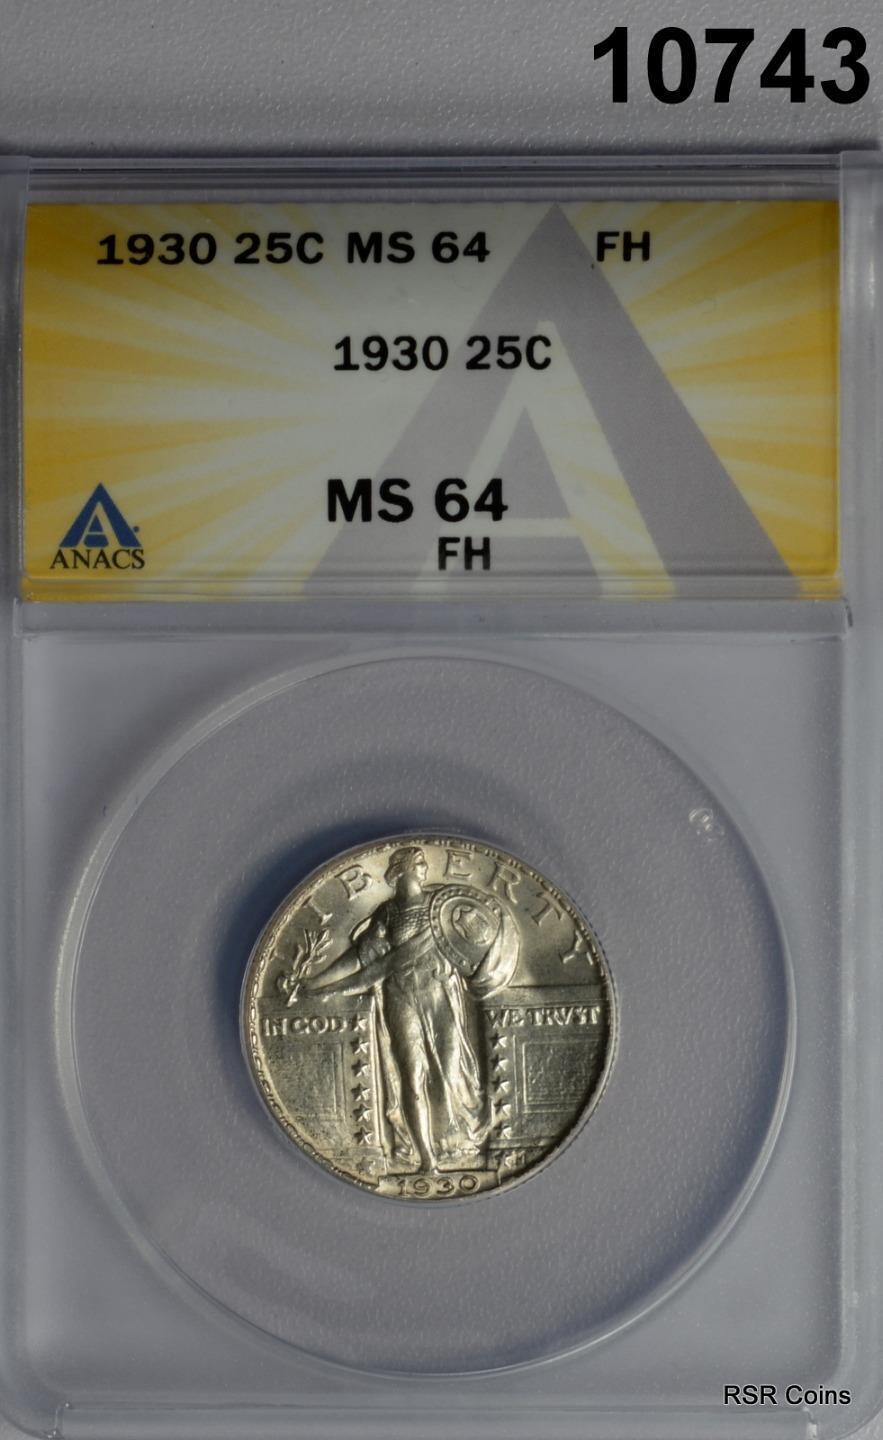 1930 STANDING LIBERTY QUARTER ANACS CERTIFIED MS64 FH NICE! #10743